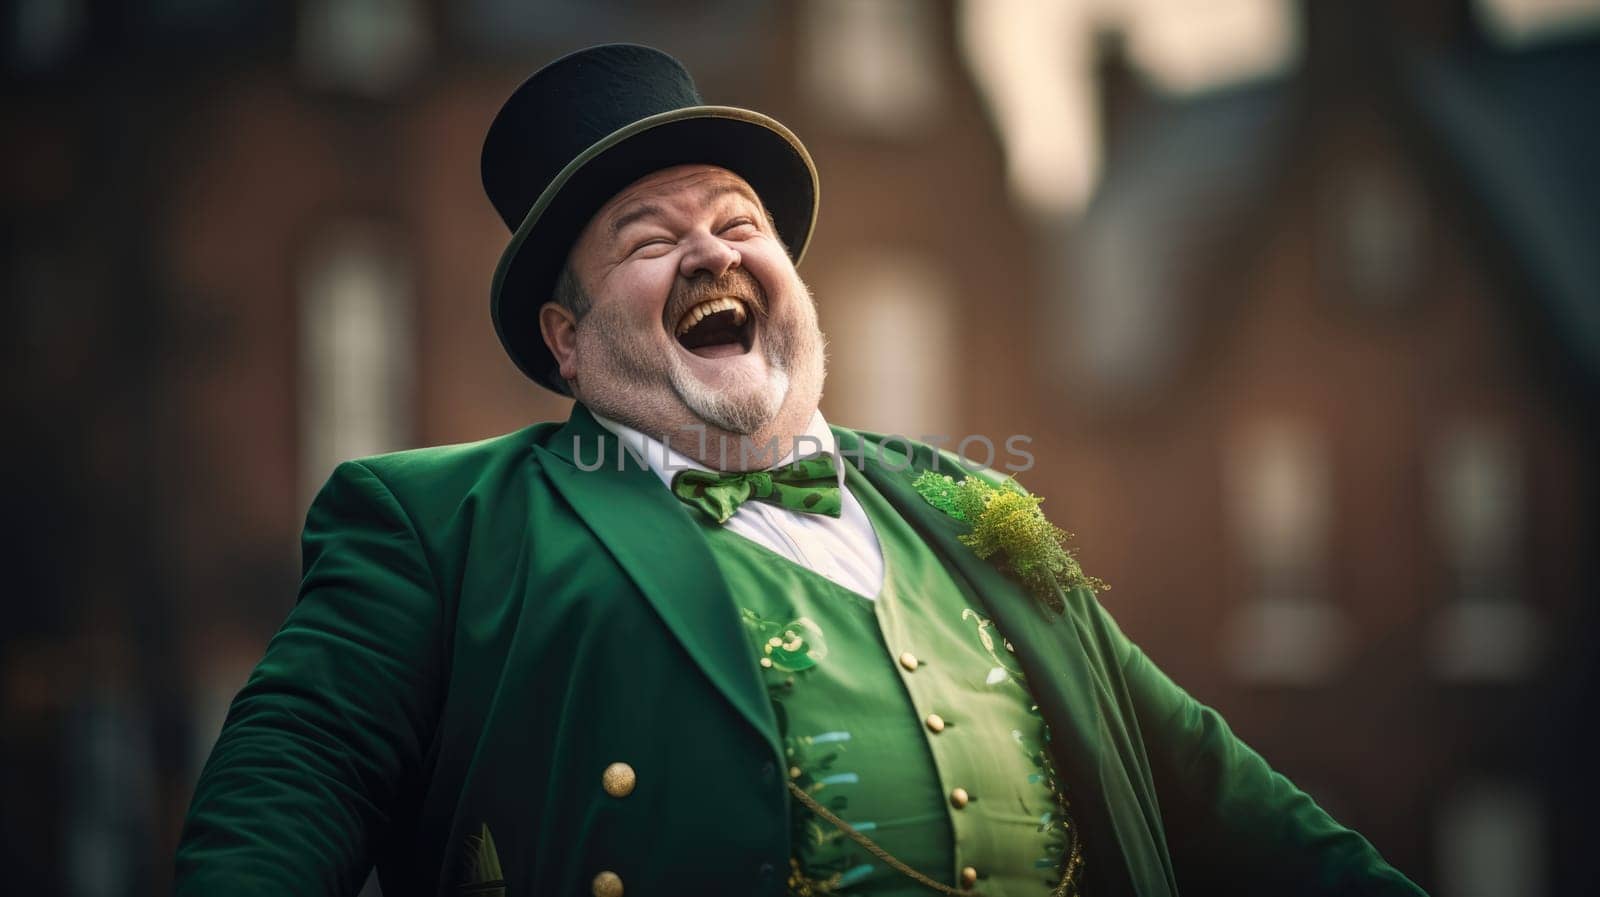 Happy St Patricks Day An Irishman in a green suit and hat is laughing. by JuliaDorian